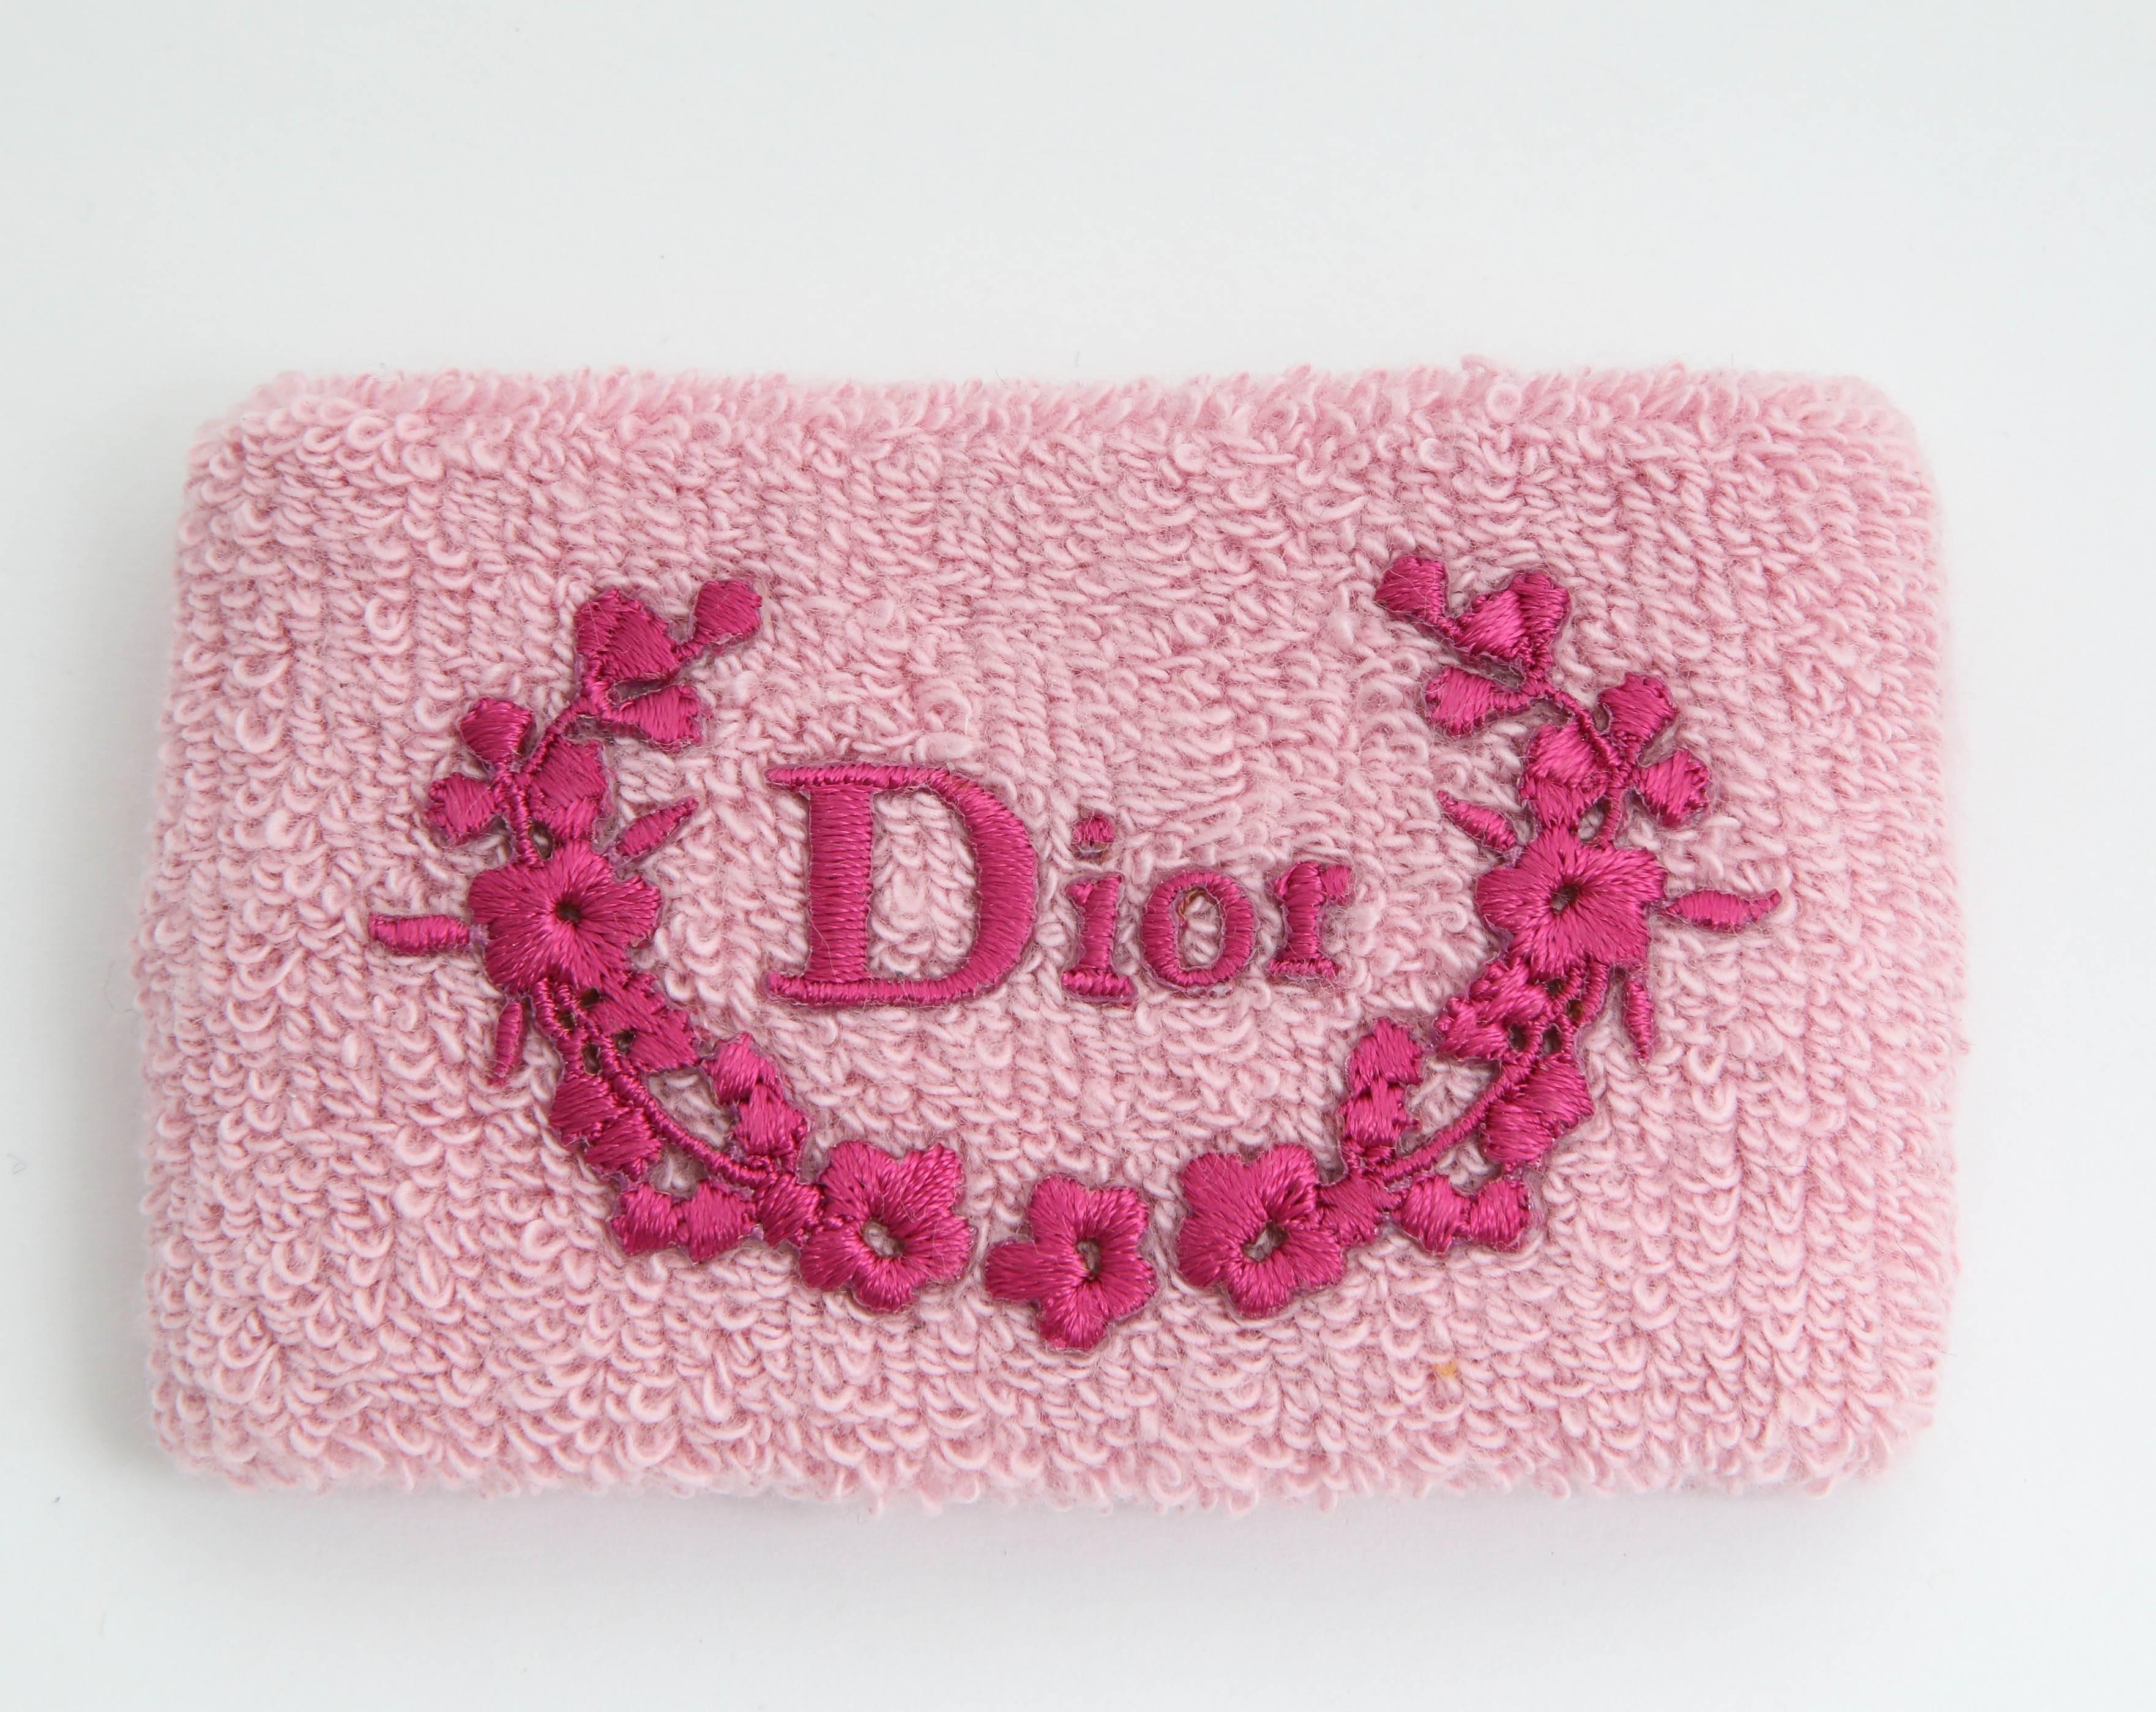 Women's Christian Dior by John Galliano Pink Wrist Band For Sale